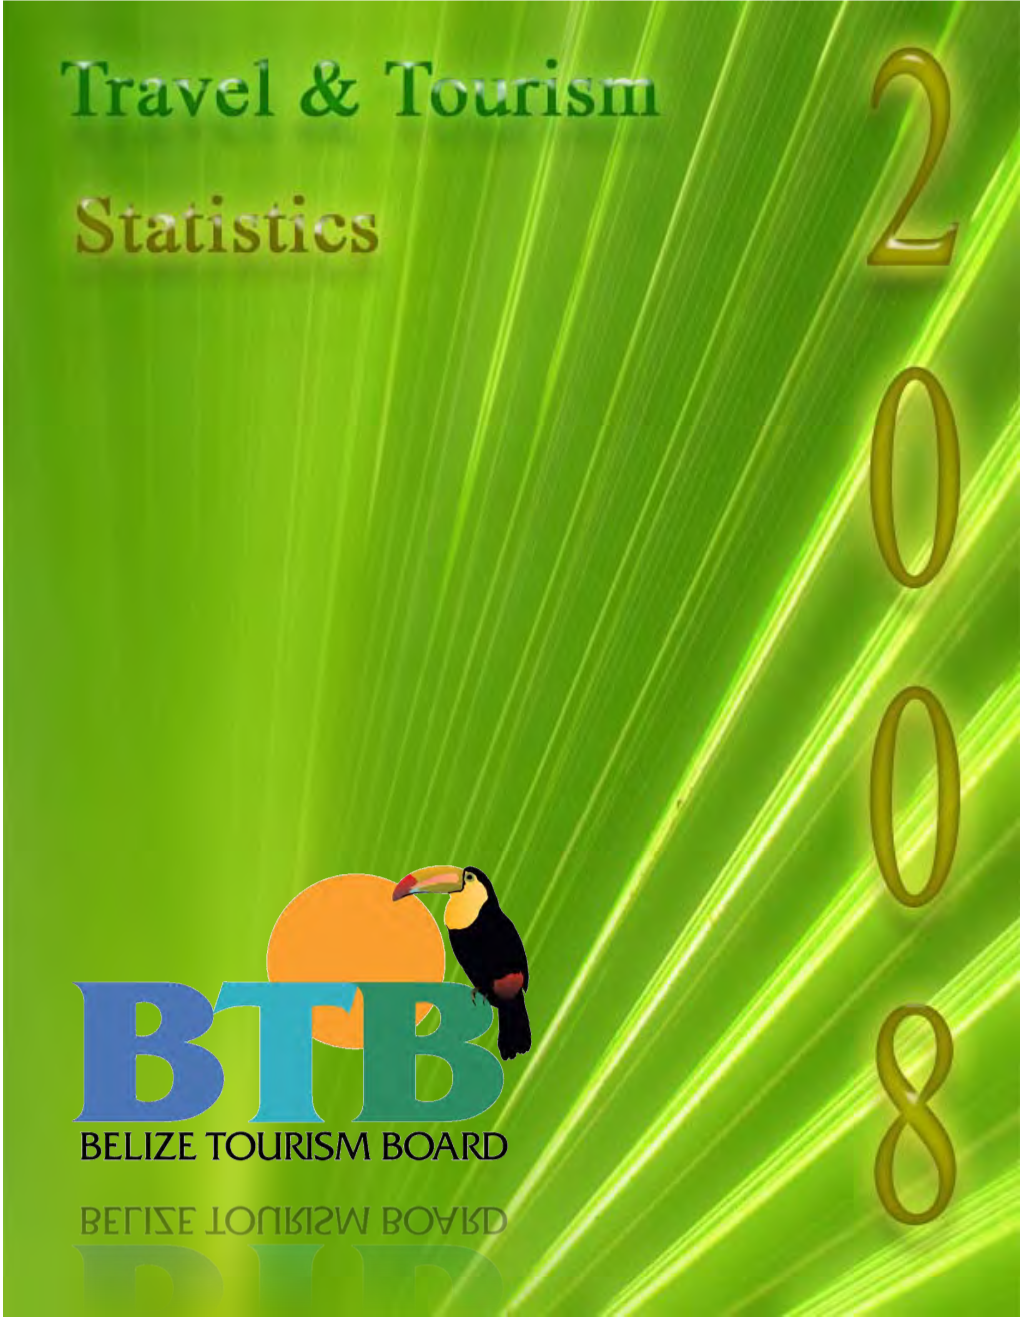 Belize Tourism Board (BTB) Wishes to Thank the Following Organizations for Providing Us Annually with the Data Which Makes This Publication Possible